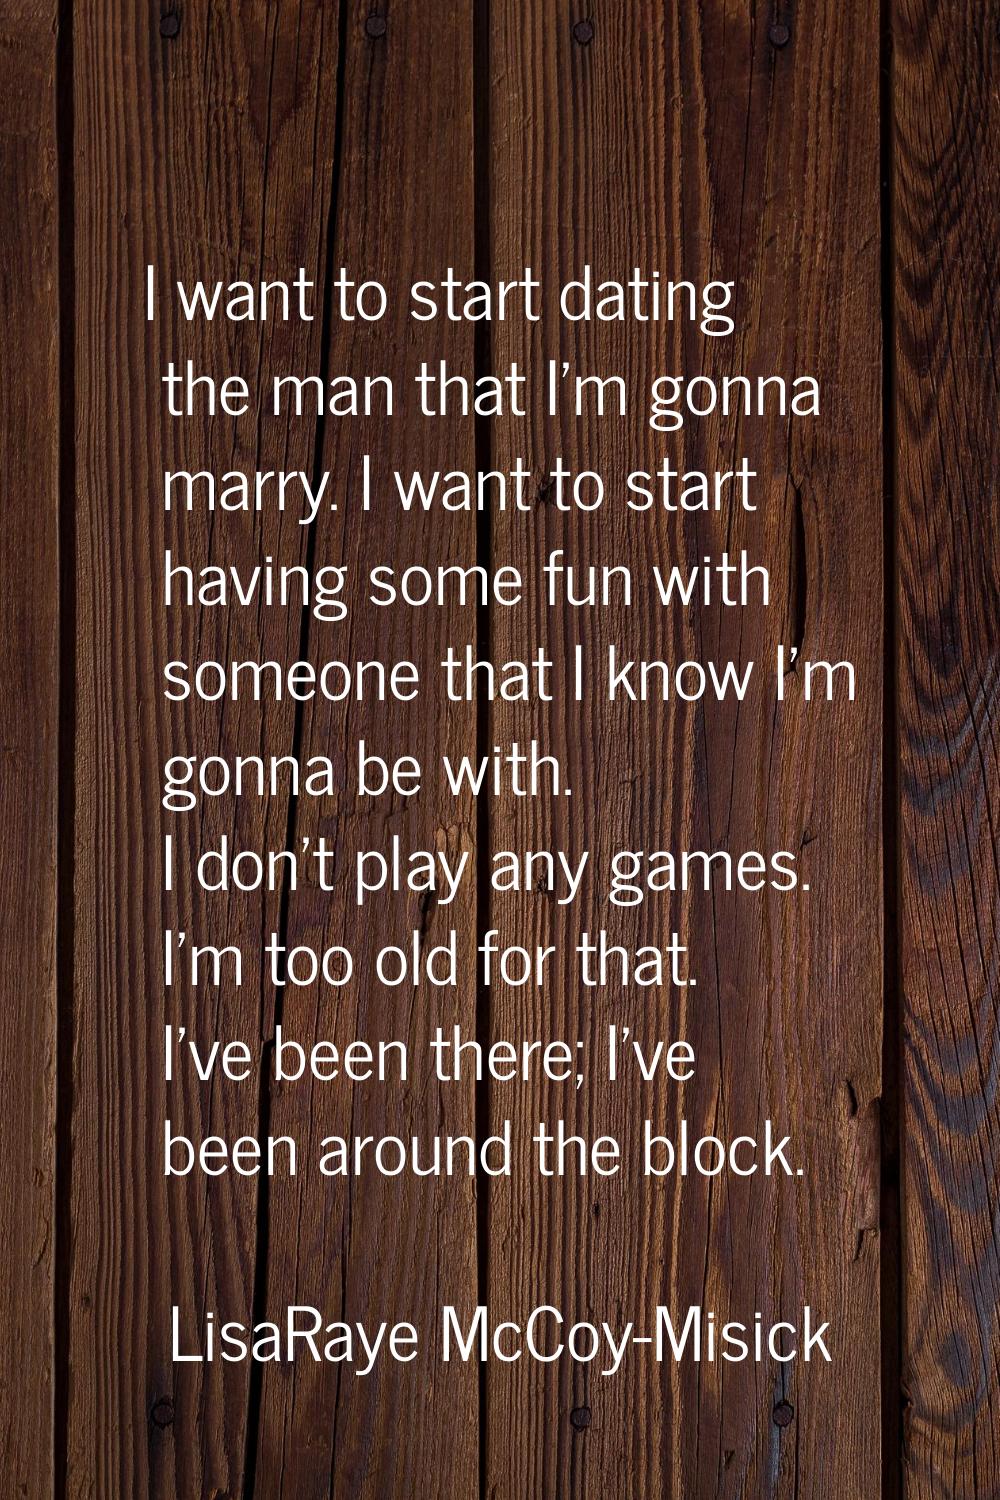 I want to start dating the man that I'm gonna marry. I want to start having some fun with someone t